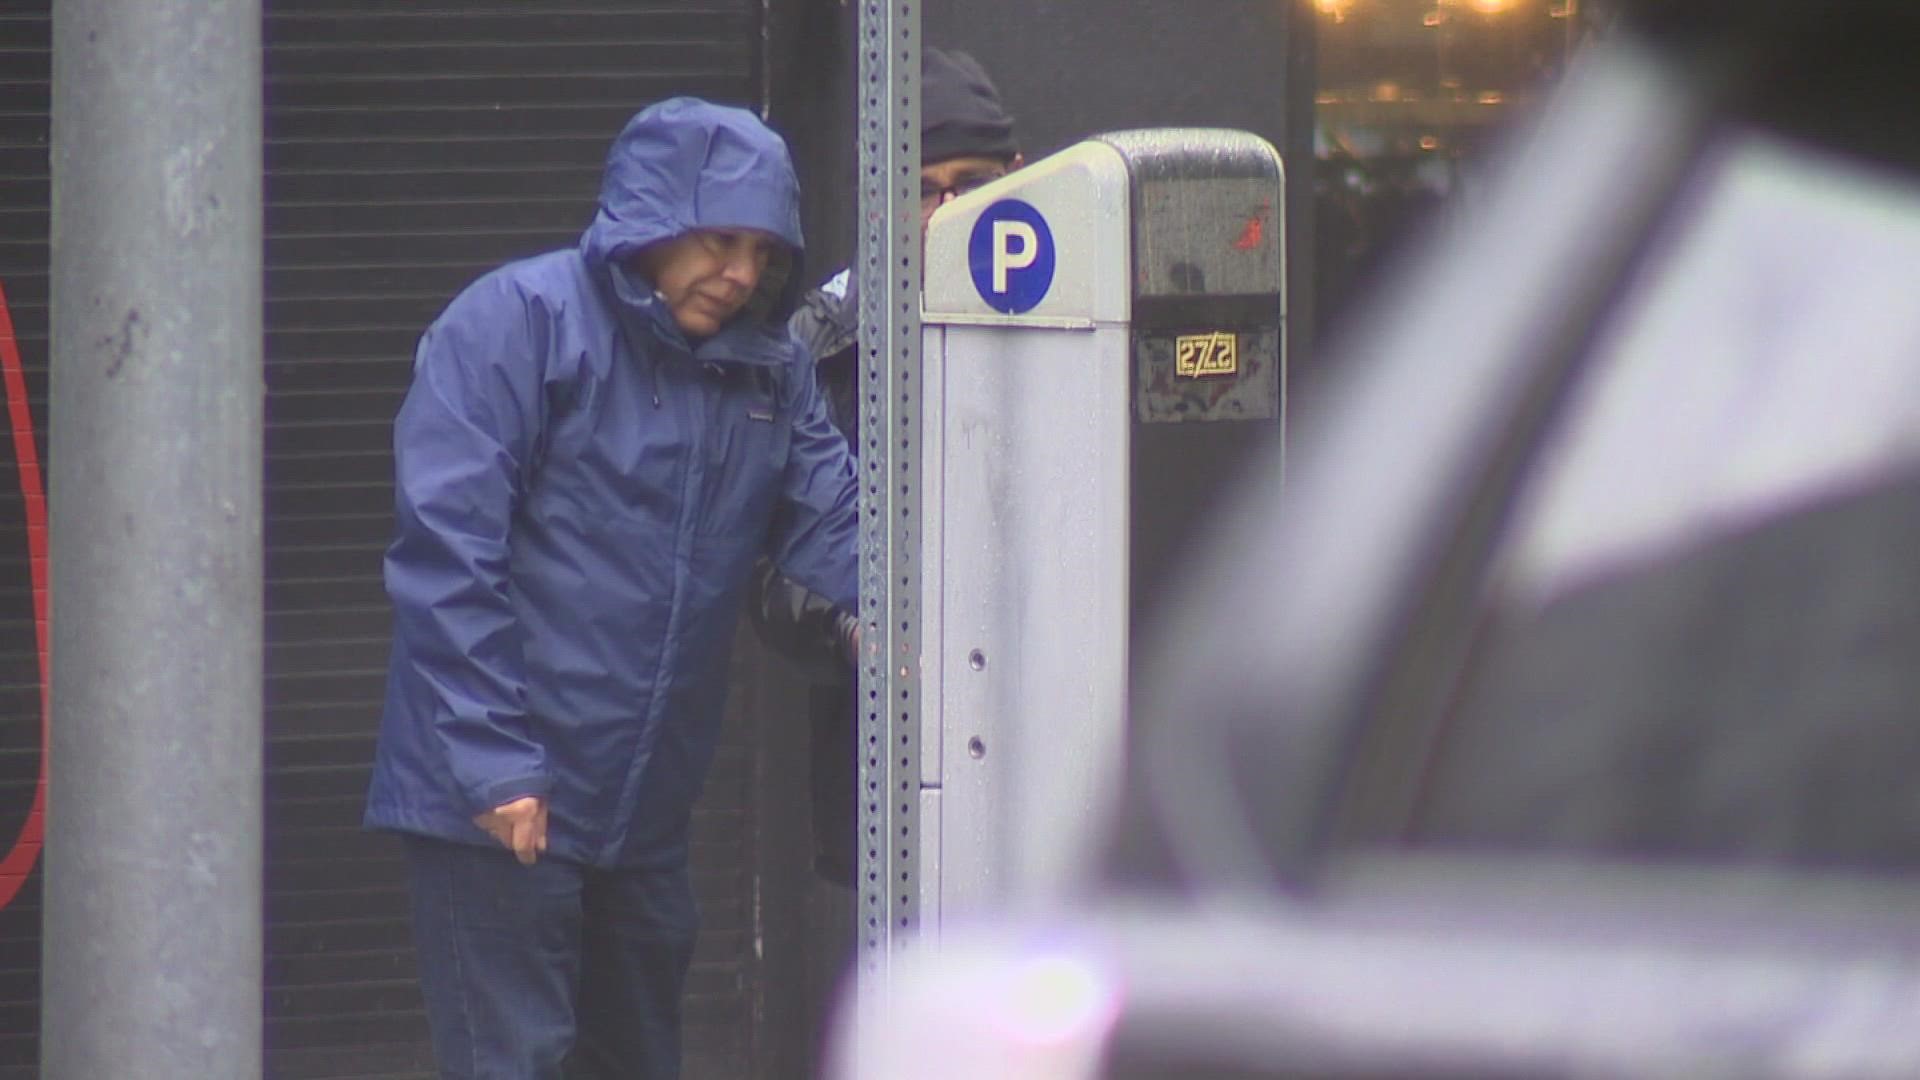 The Seattle Department of Transportation said rates were staying the same or decreasing at around two-thirds of the parking locations and times in the city.